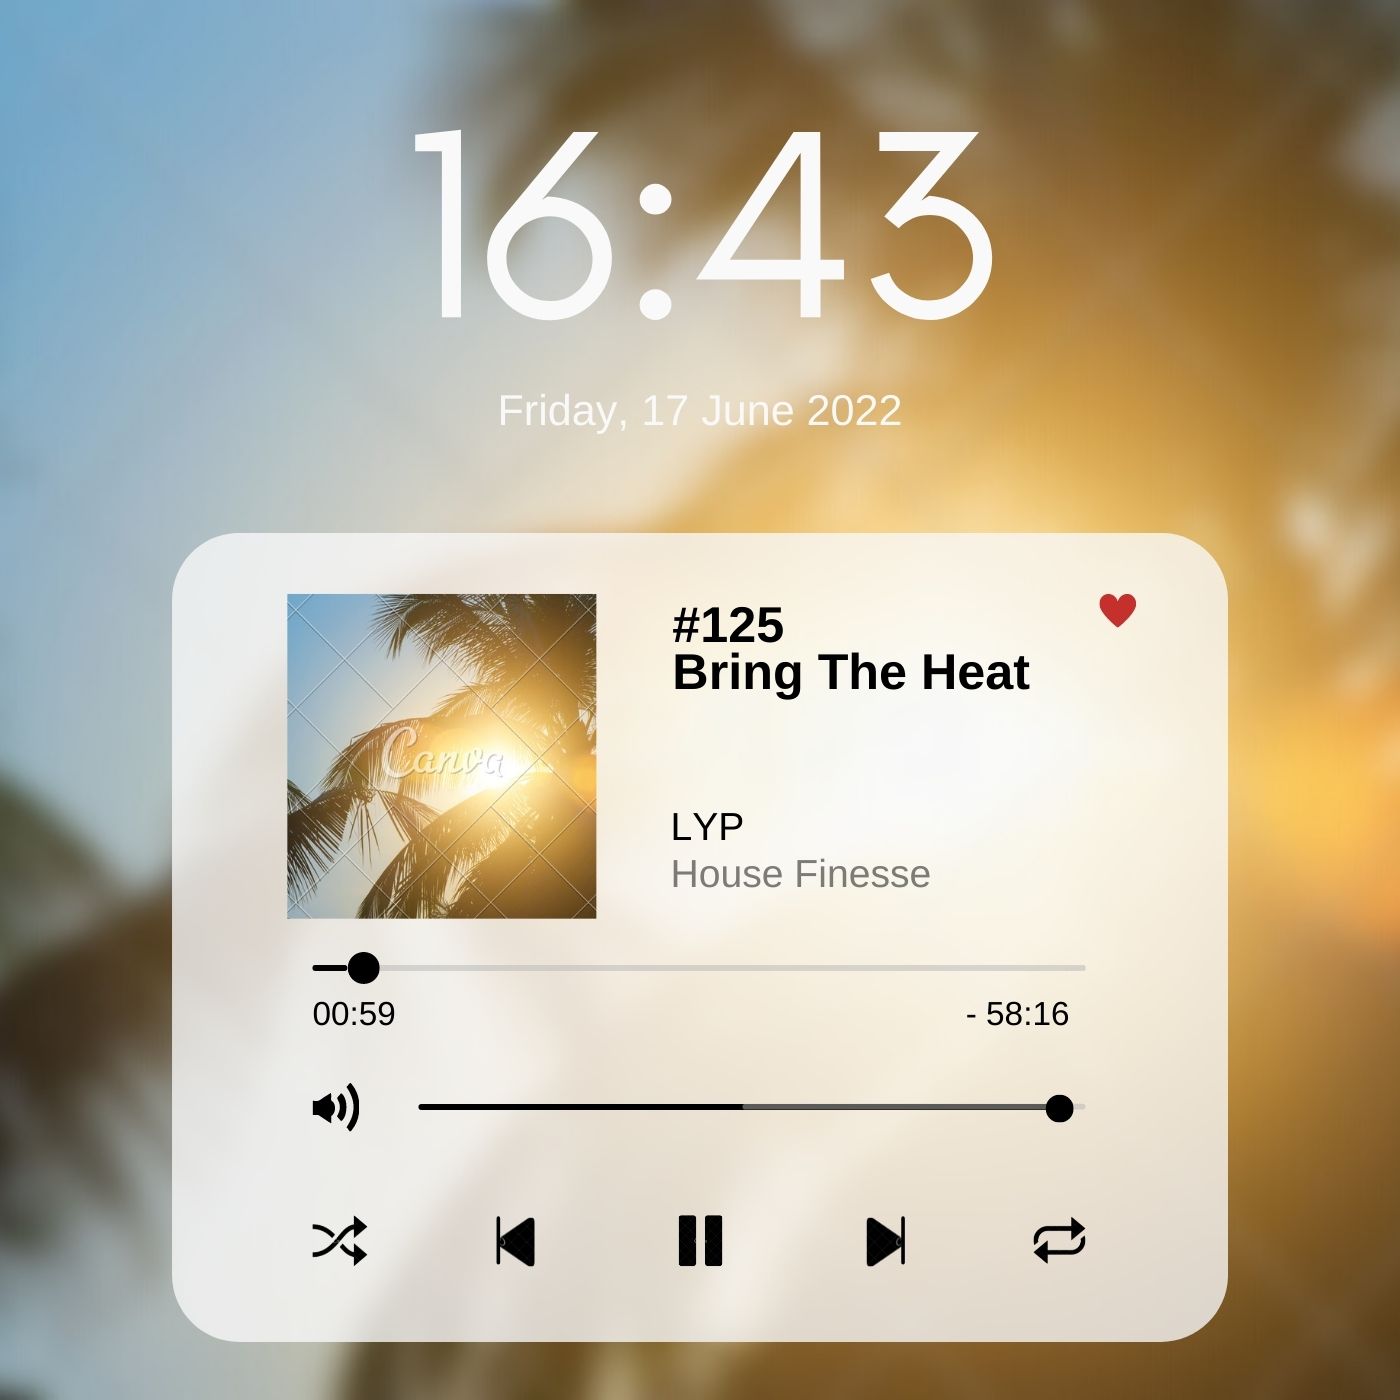 Bring The Heat with LYP